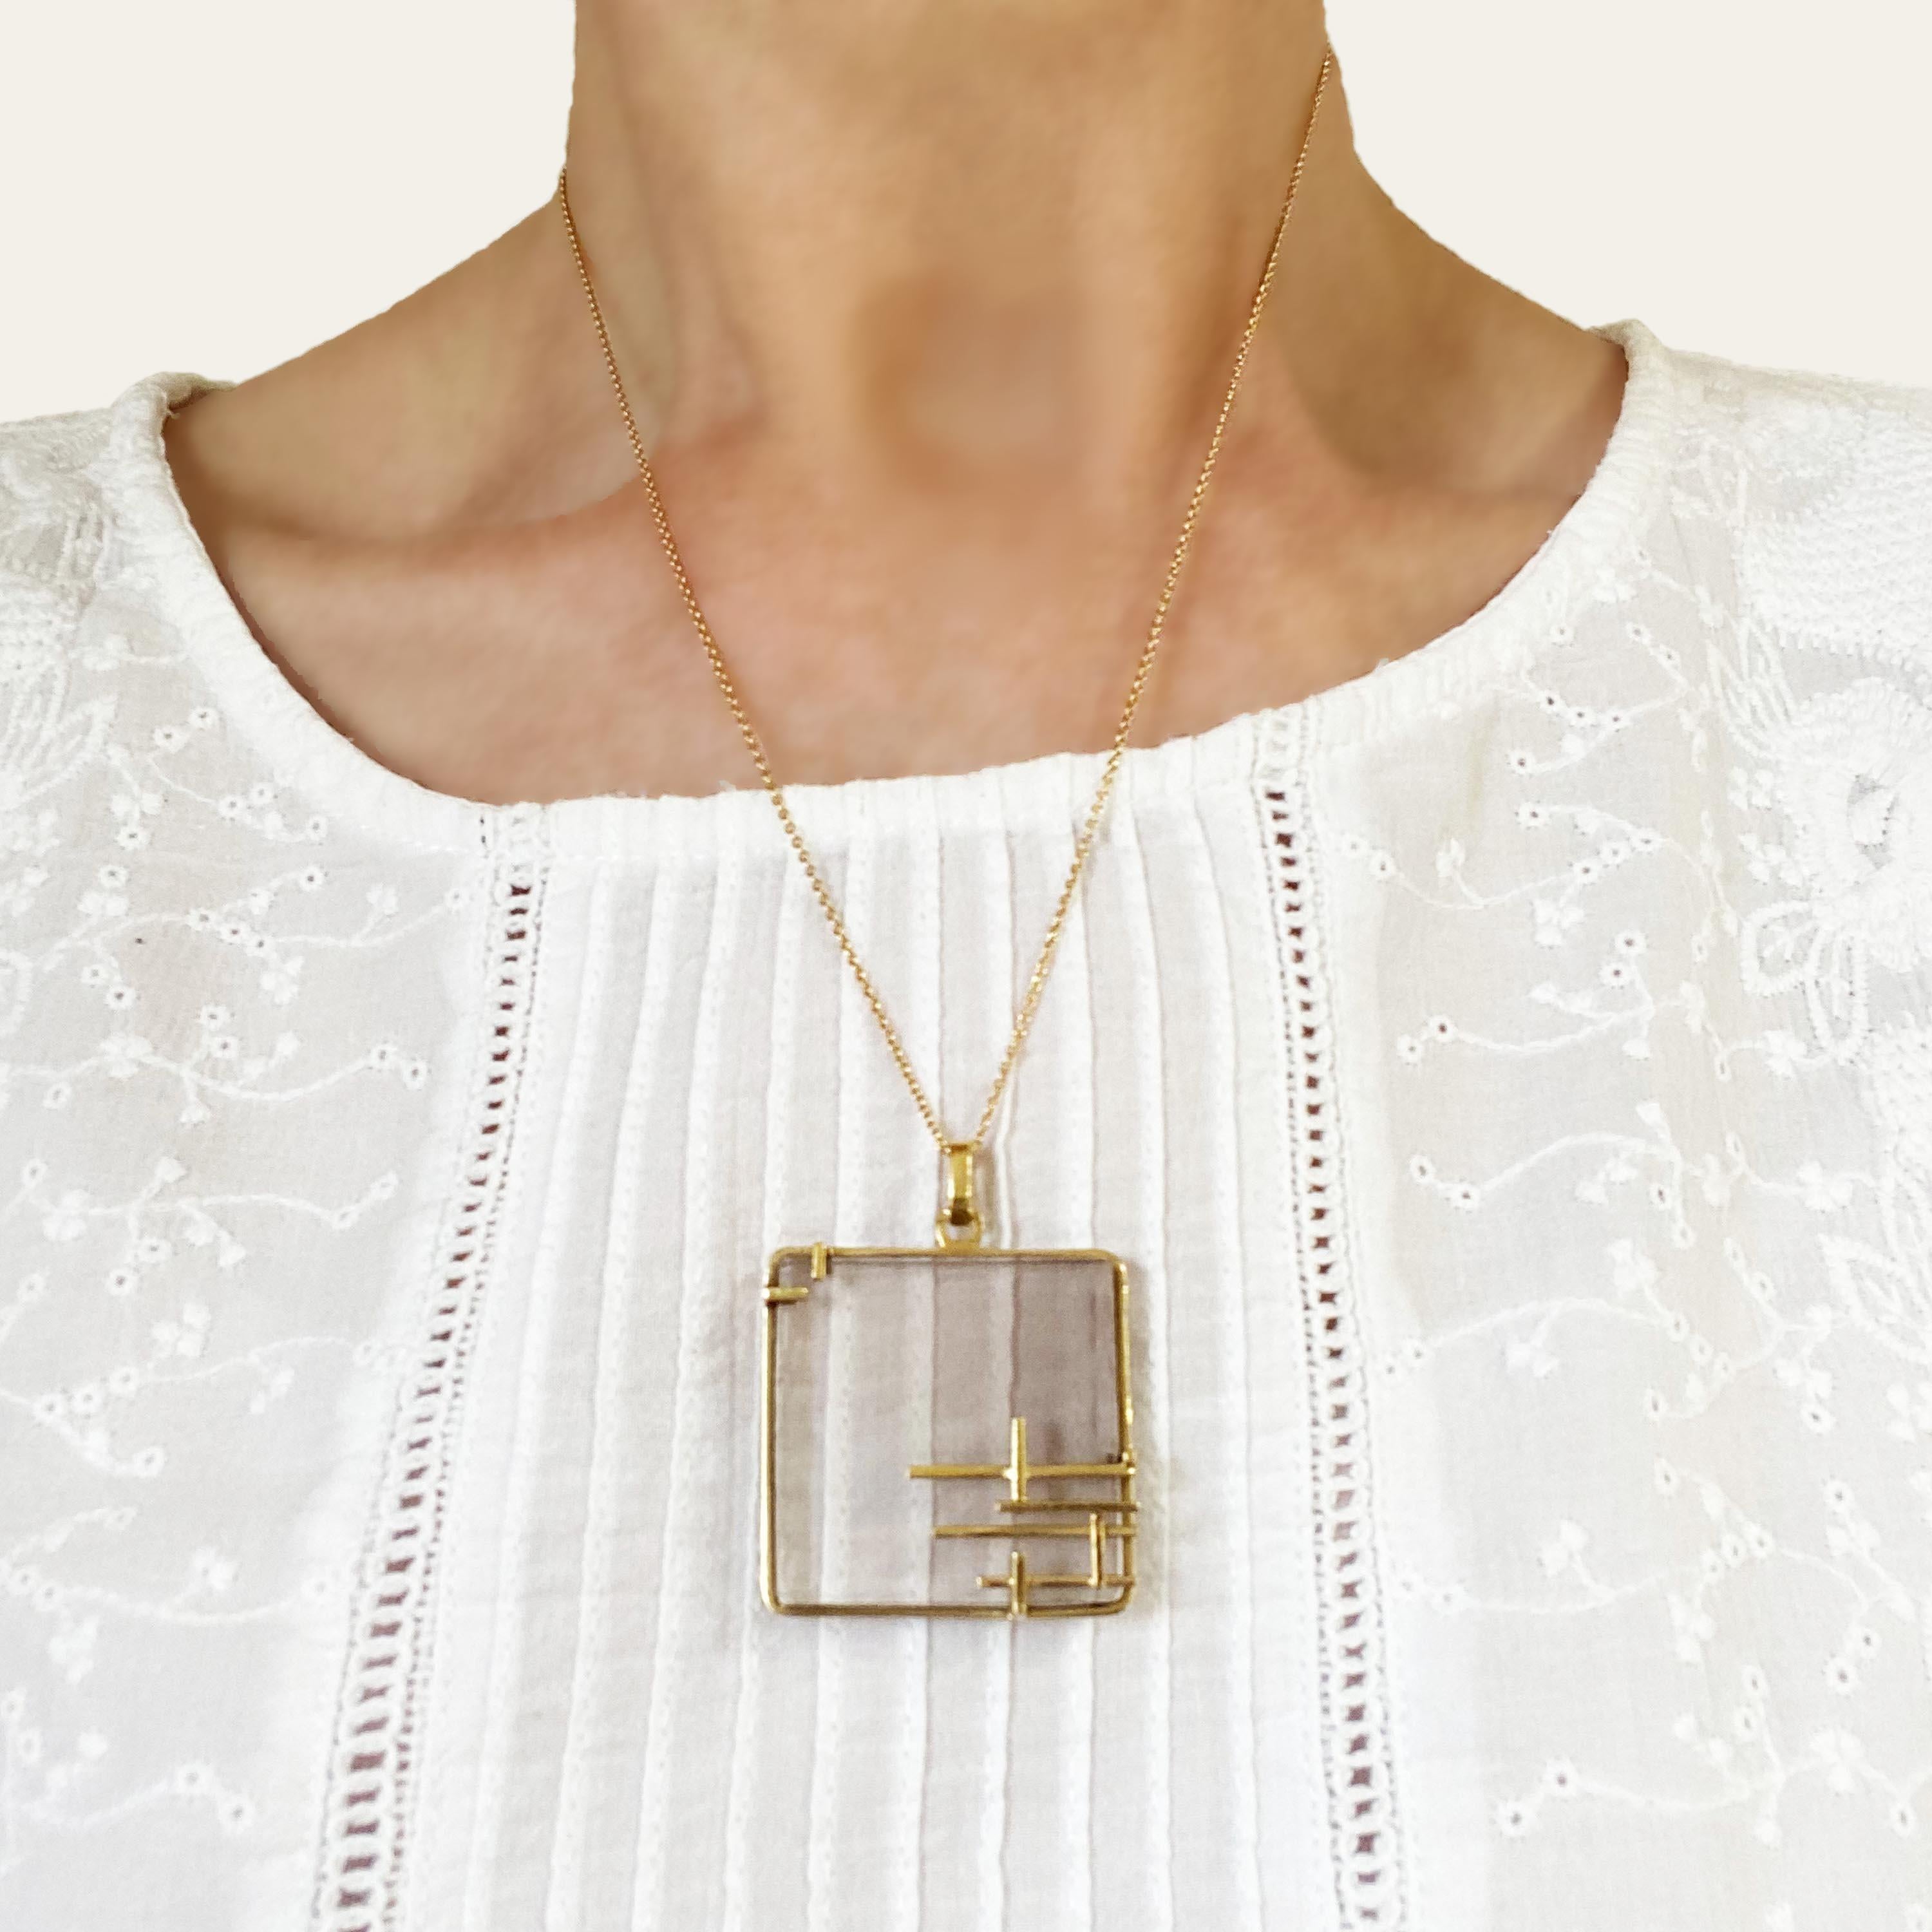 A French retro modernist smoky quartz and gold pendant, with a square, shaded tile of smoky quartz, held by a surround of rectangular heavy gold wire, with abstract, geometric gold, Mondrian influenced, decoration, typical of the period, on a simple